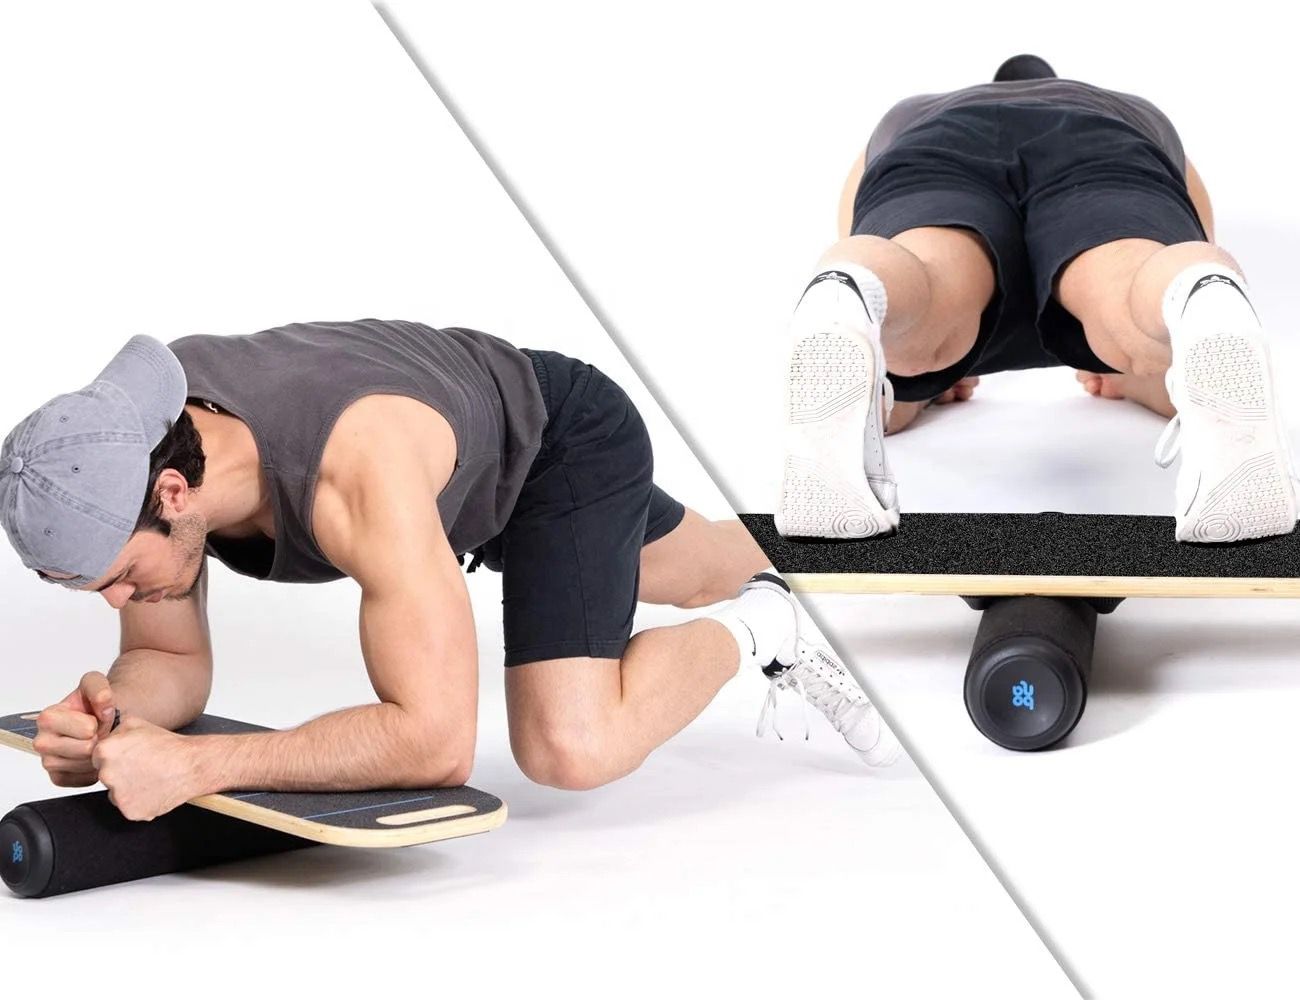 Wooden Balance Board for Fitness Training